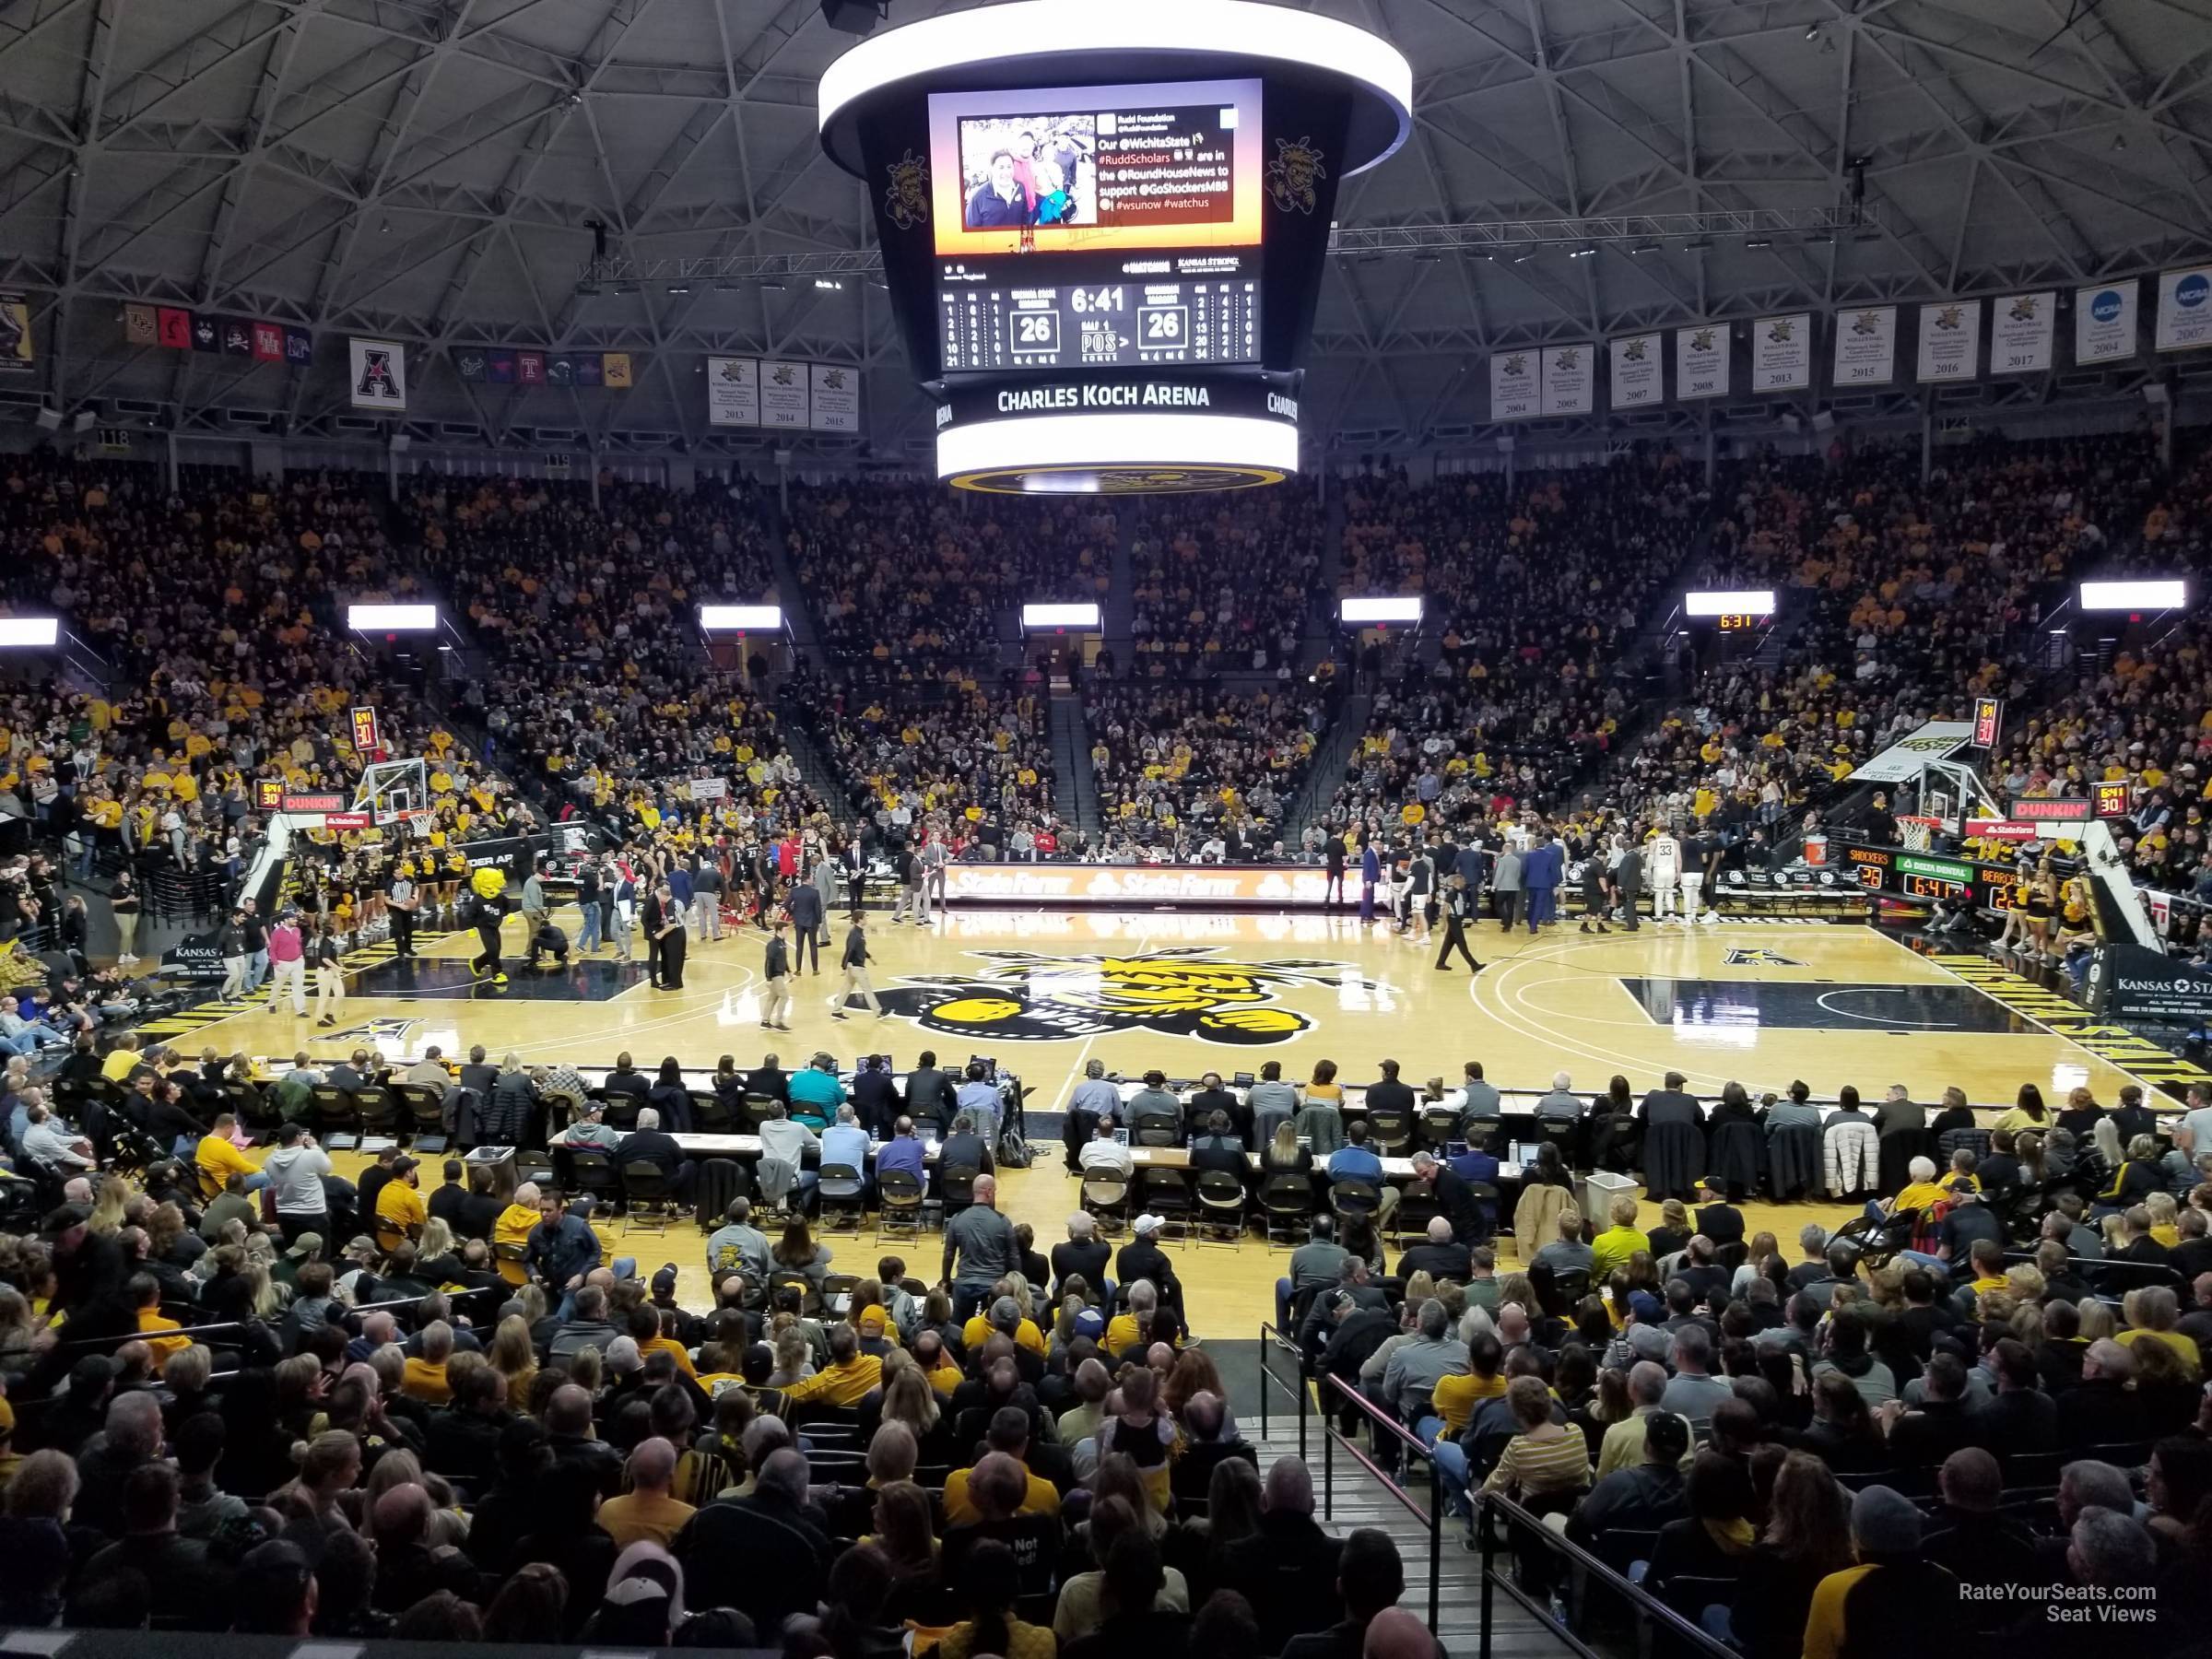 section 107, row 21 seat view  - charles koch arena